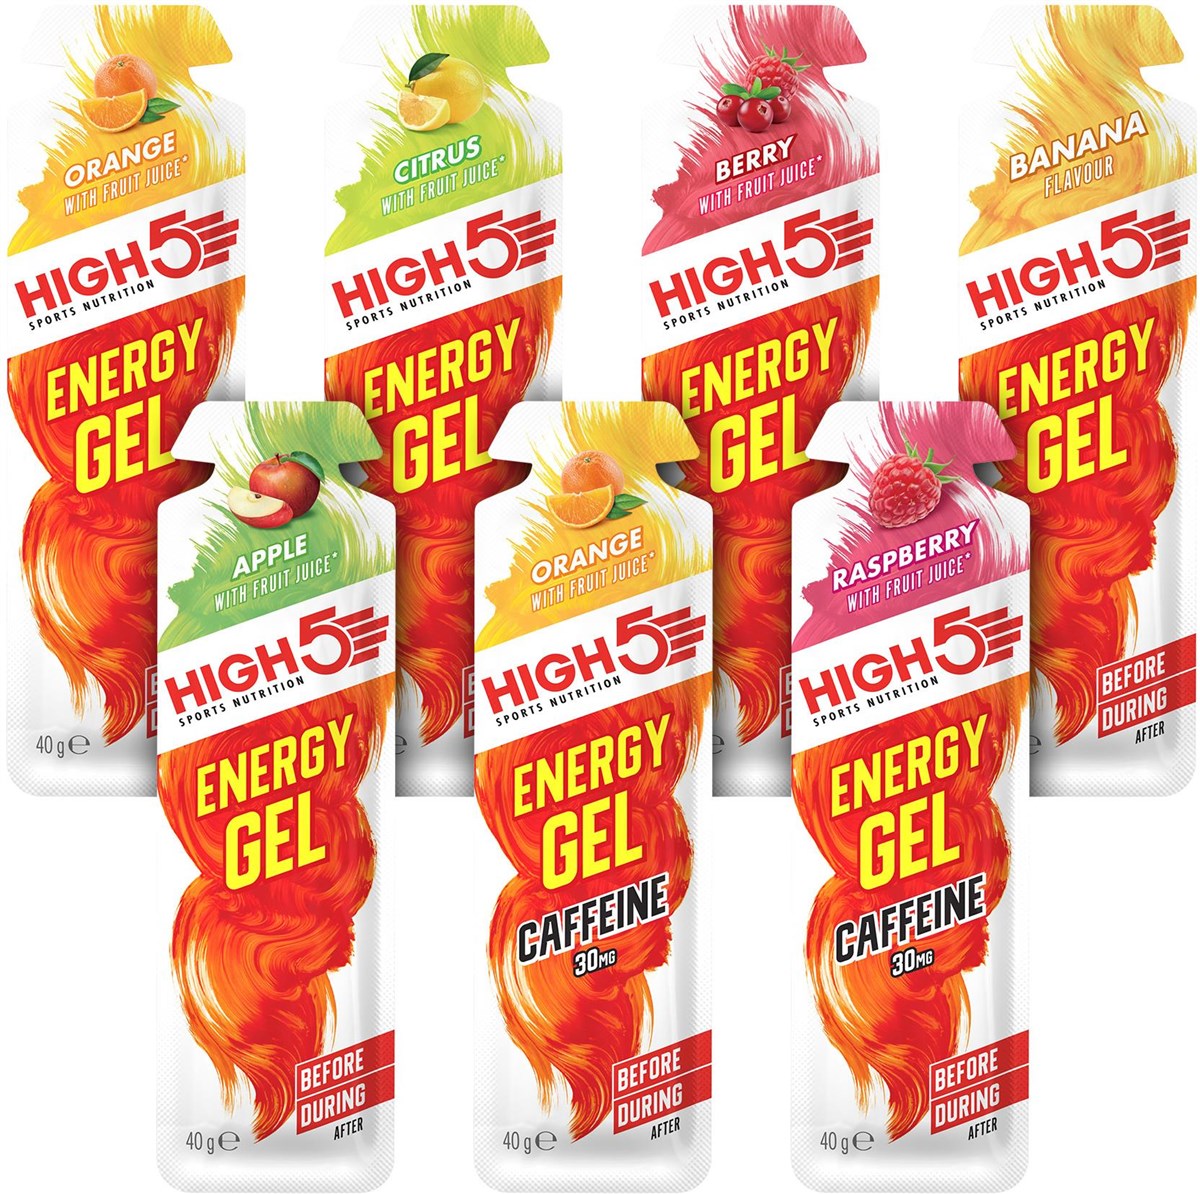 High5 Energy Gel Mixed Pack 20 x 40g Sachet product image